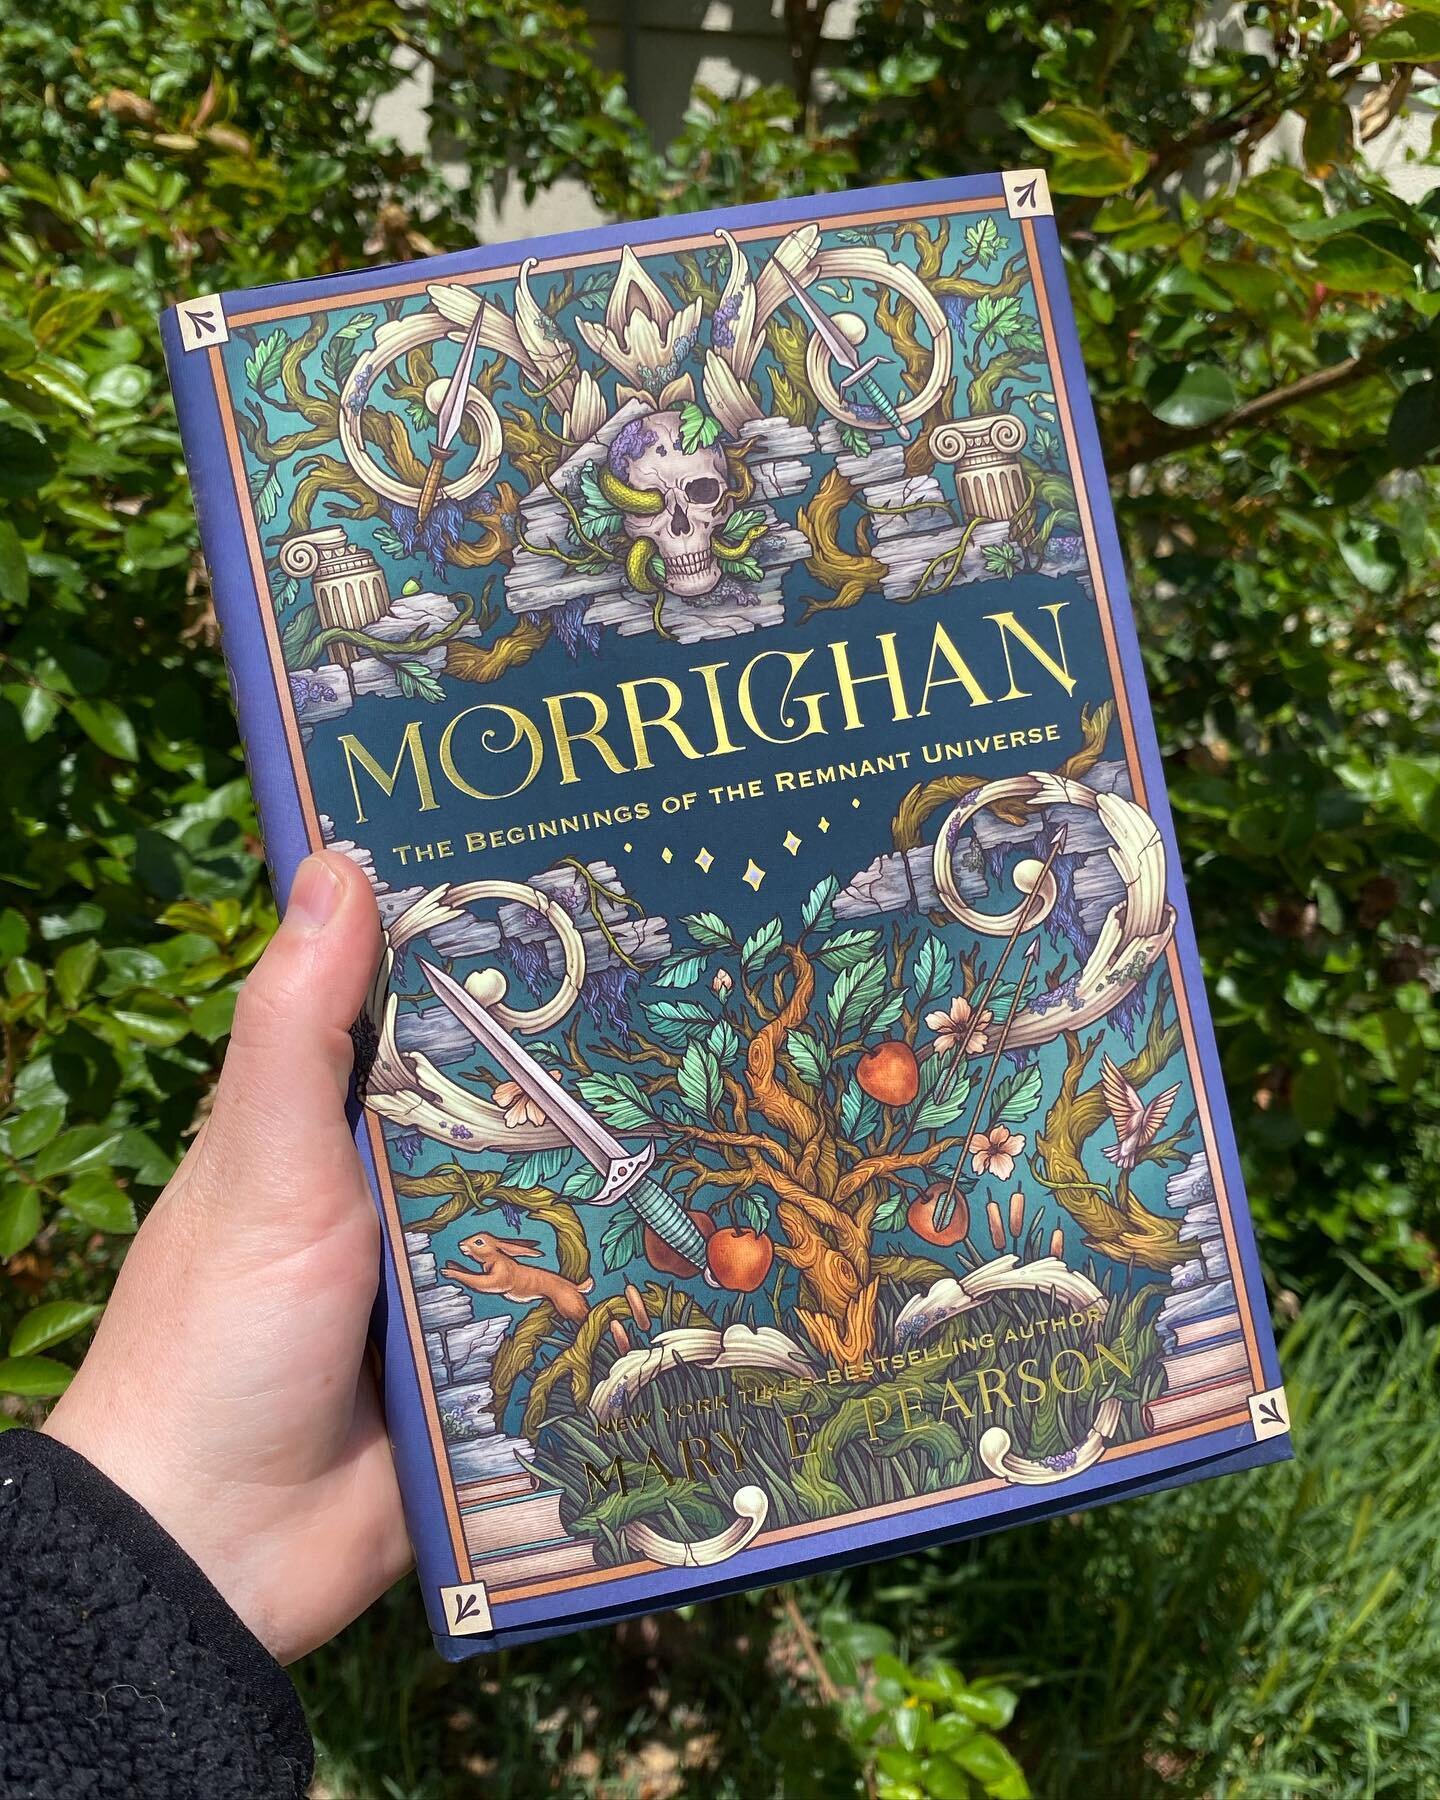 Just got my artist copies of Morrighan, a YA novel by @maryepearson that I worked on last year. So happy with how these turned out! It was a lot of fun getting to illustrate the interior art and borders, as well as the cover art on this one!
.
.
.
.
